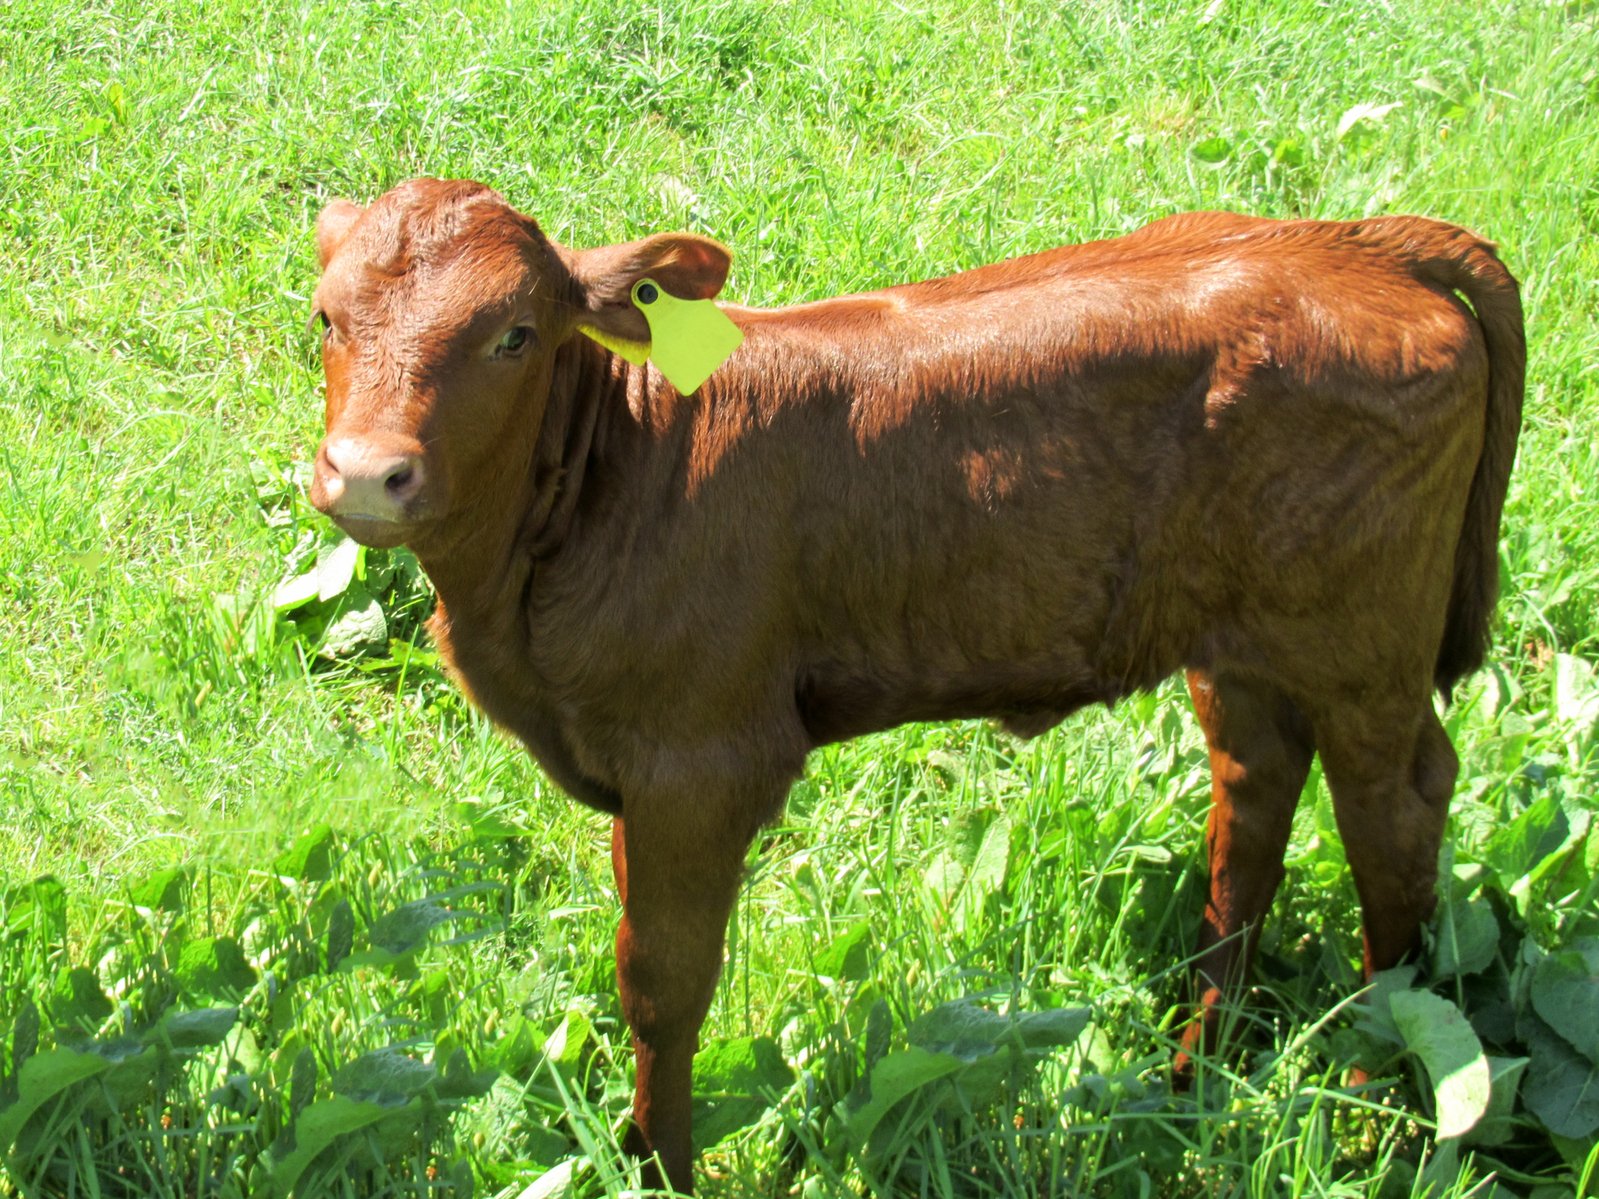 a cow standing in the grass with a tag in its ear